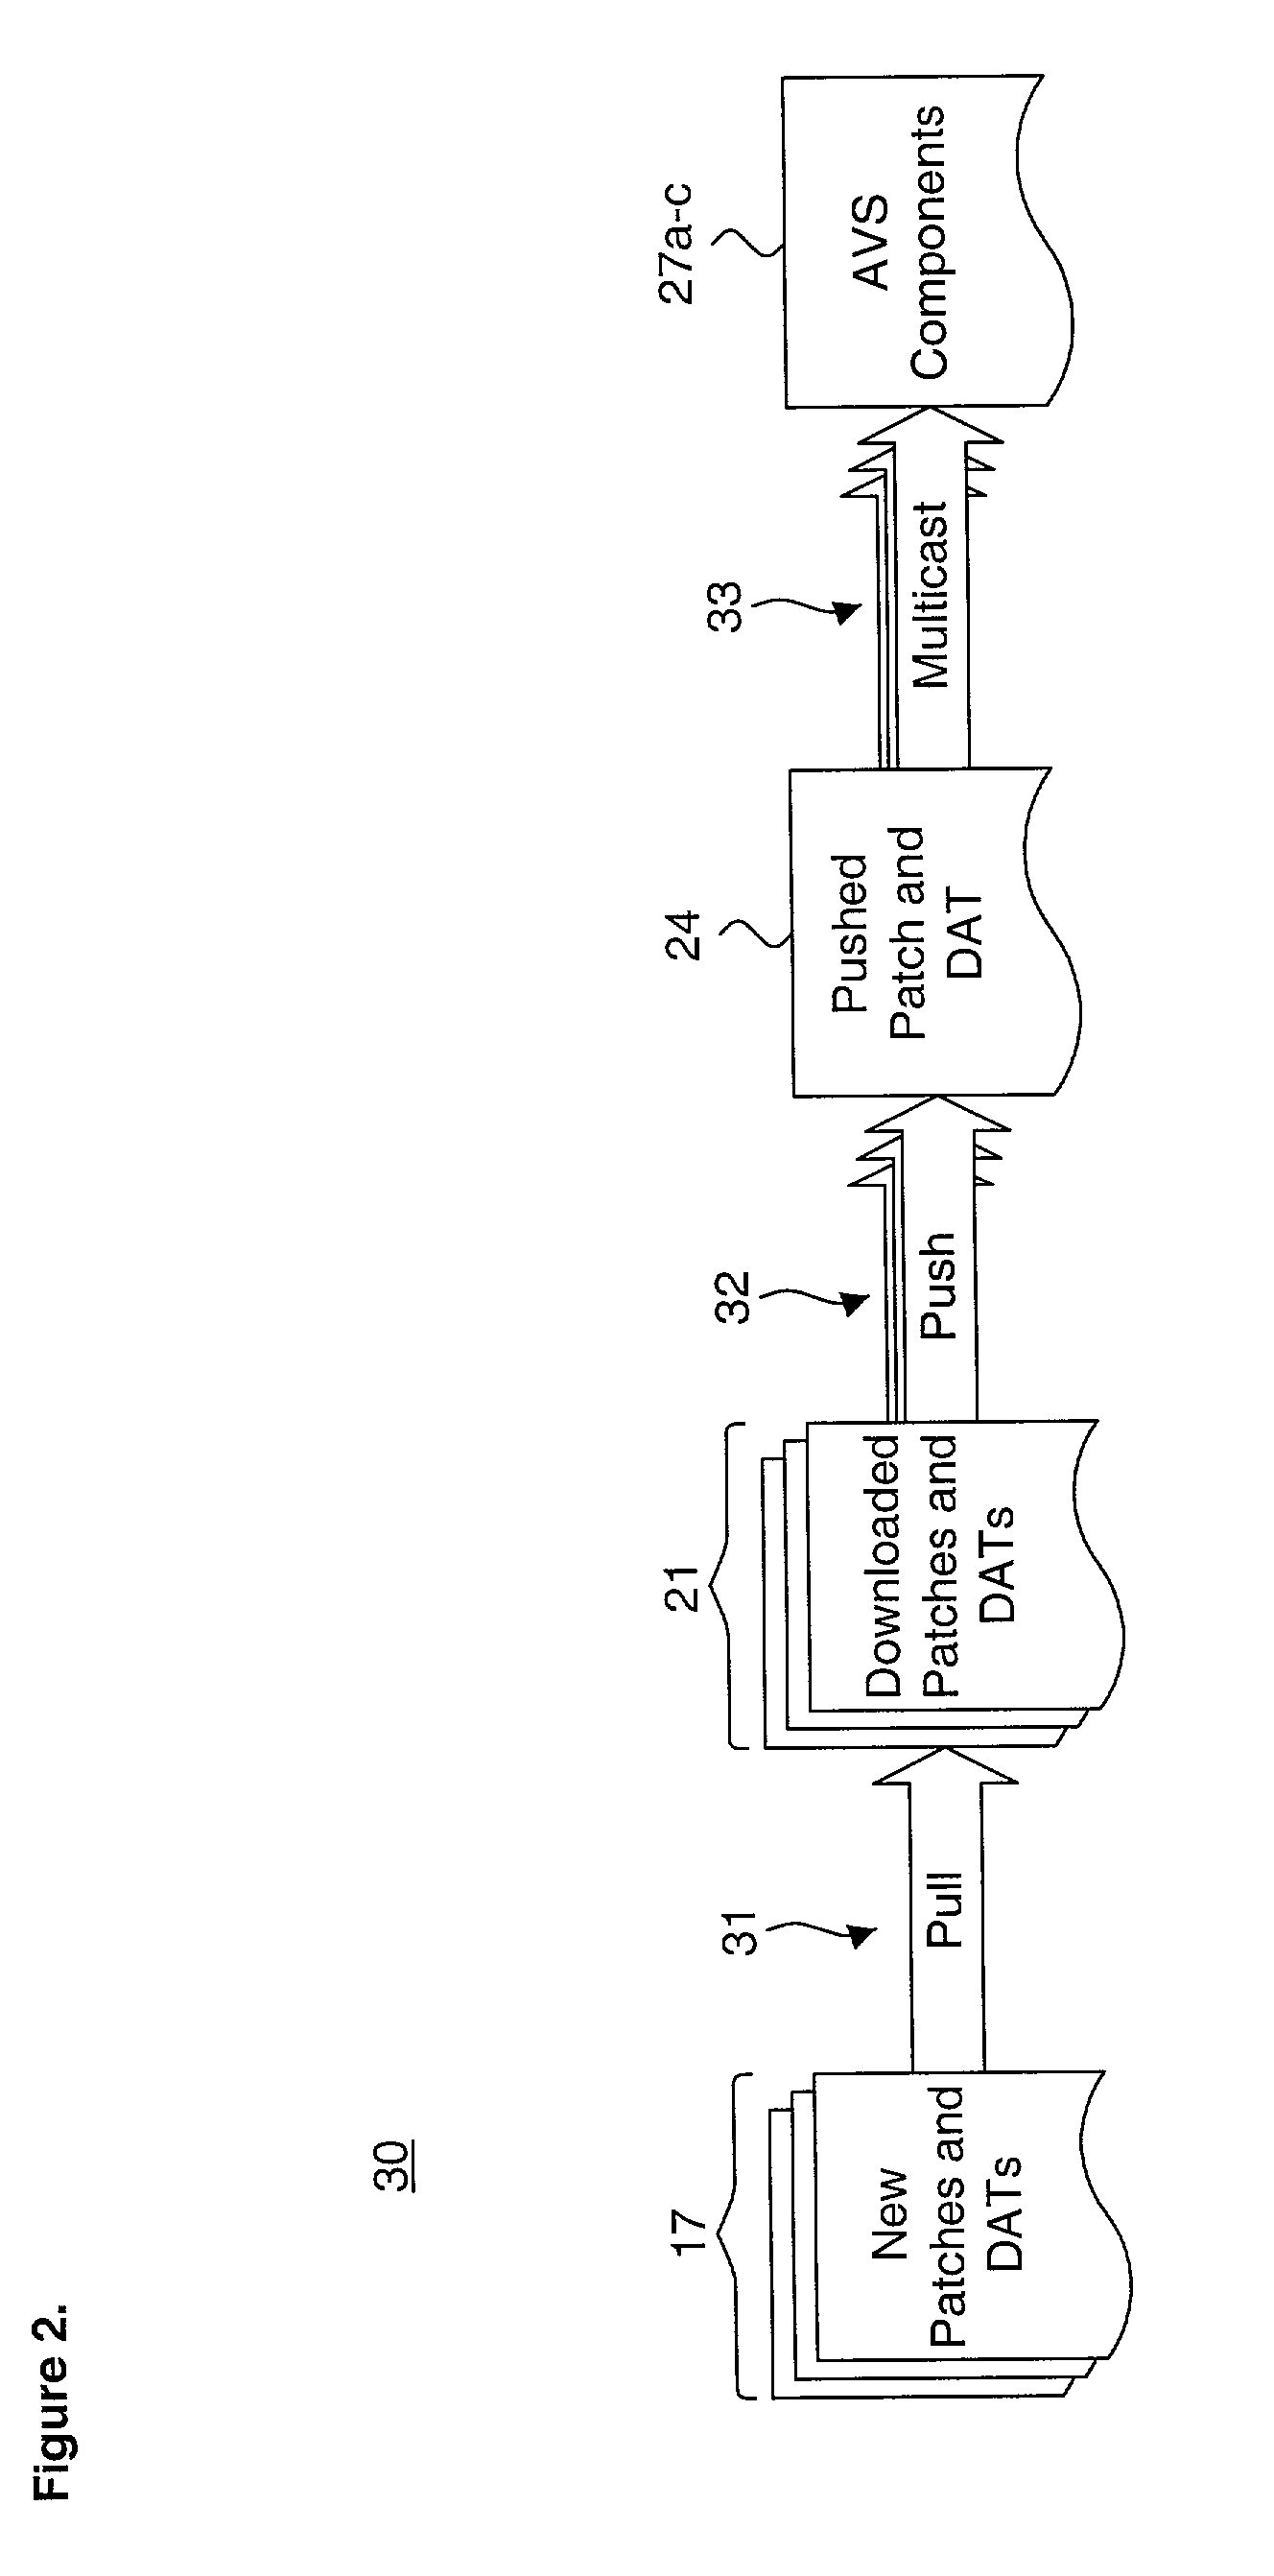 System and method for providing automated low bandwidth updates of computer anti-virus application components